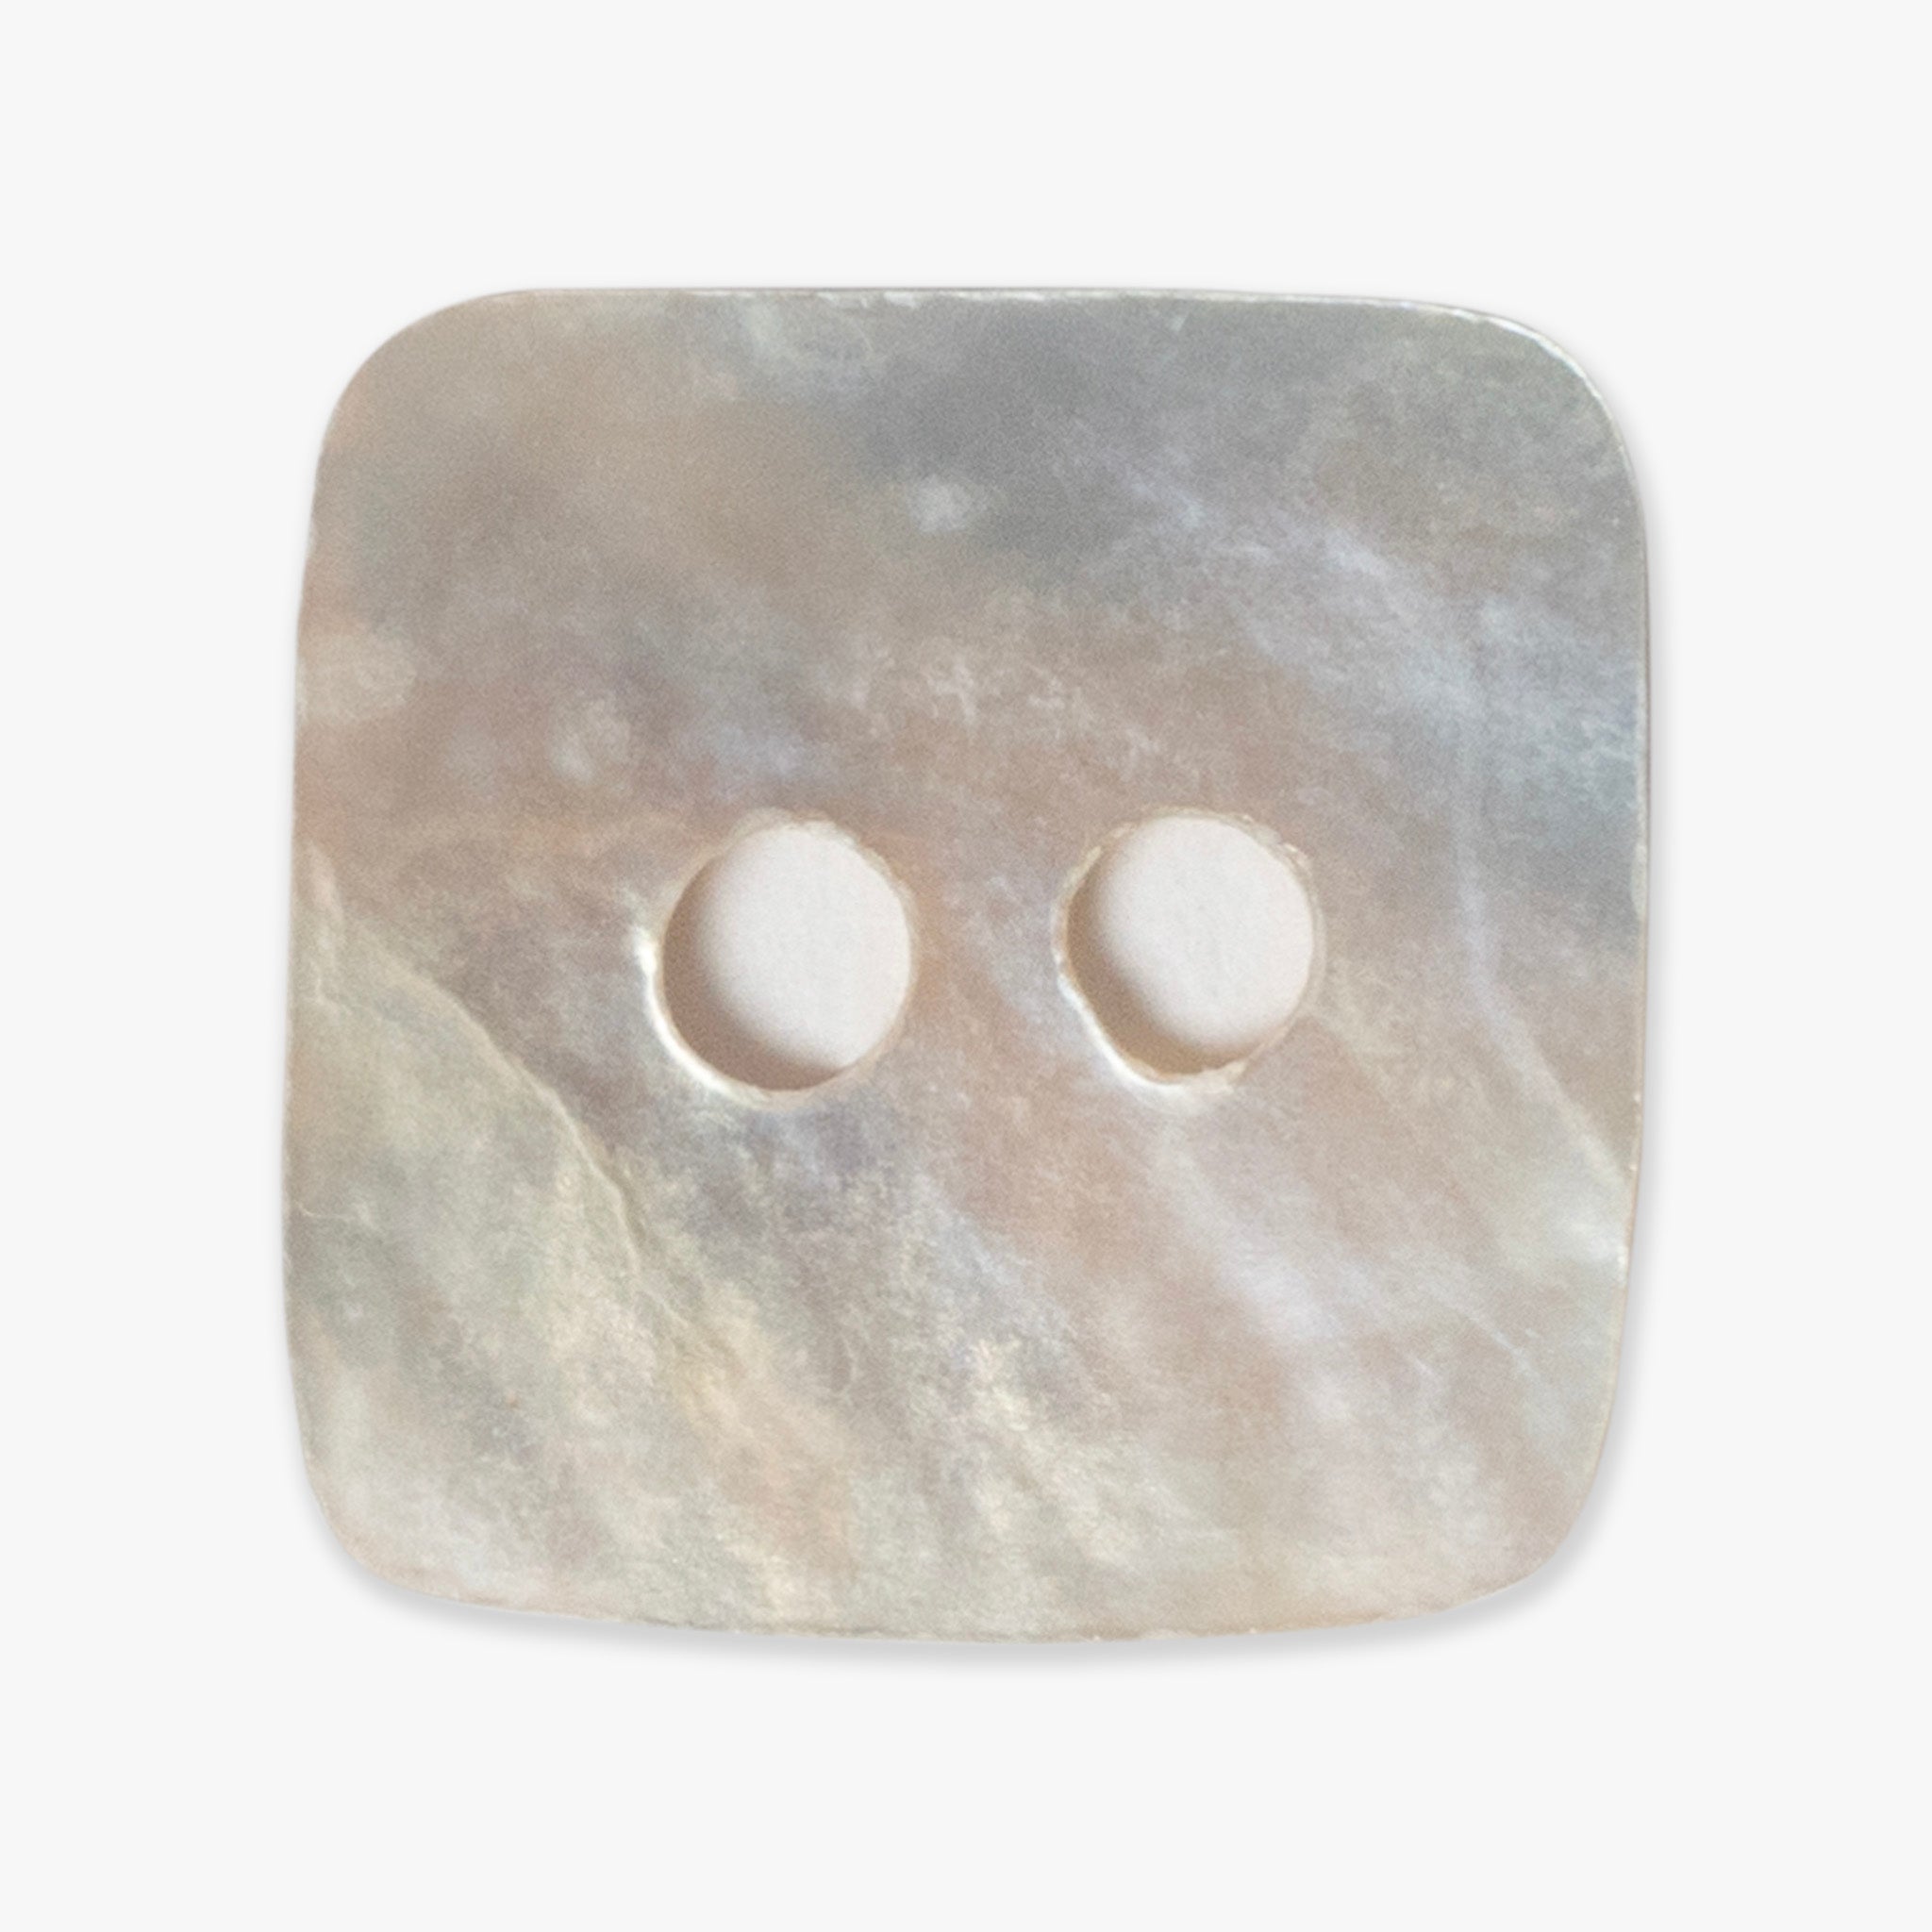 Square Natural Shell Buttons | 2-Hole | 10mm